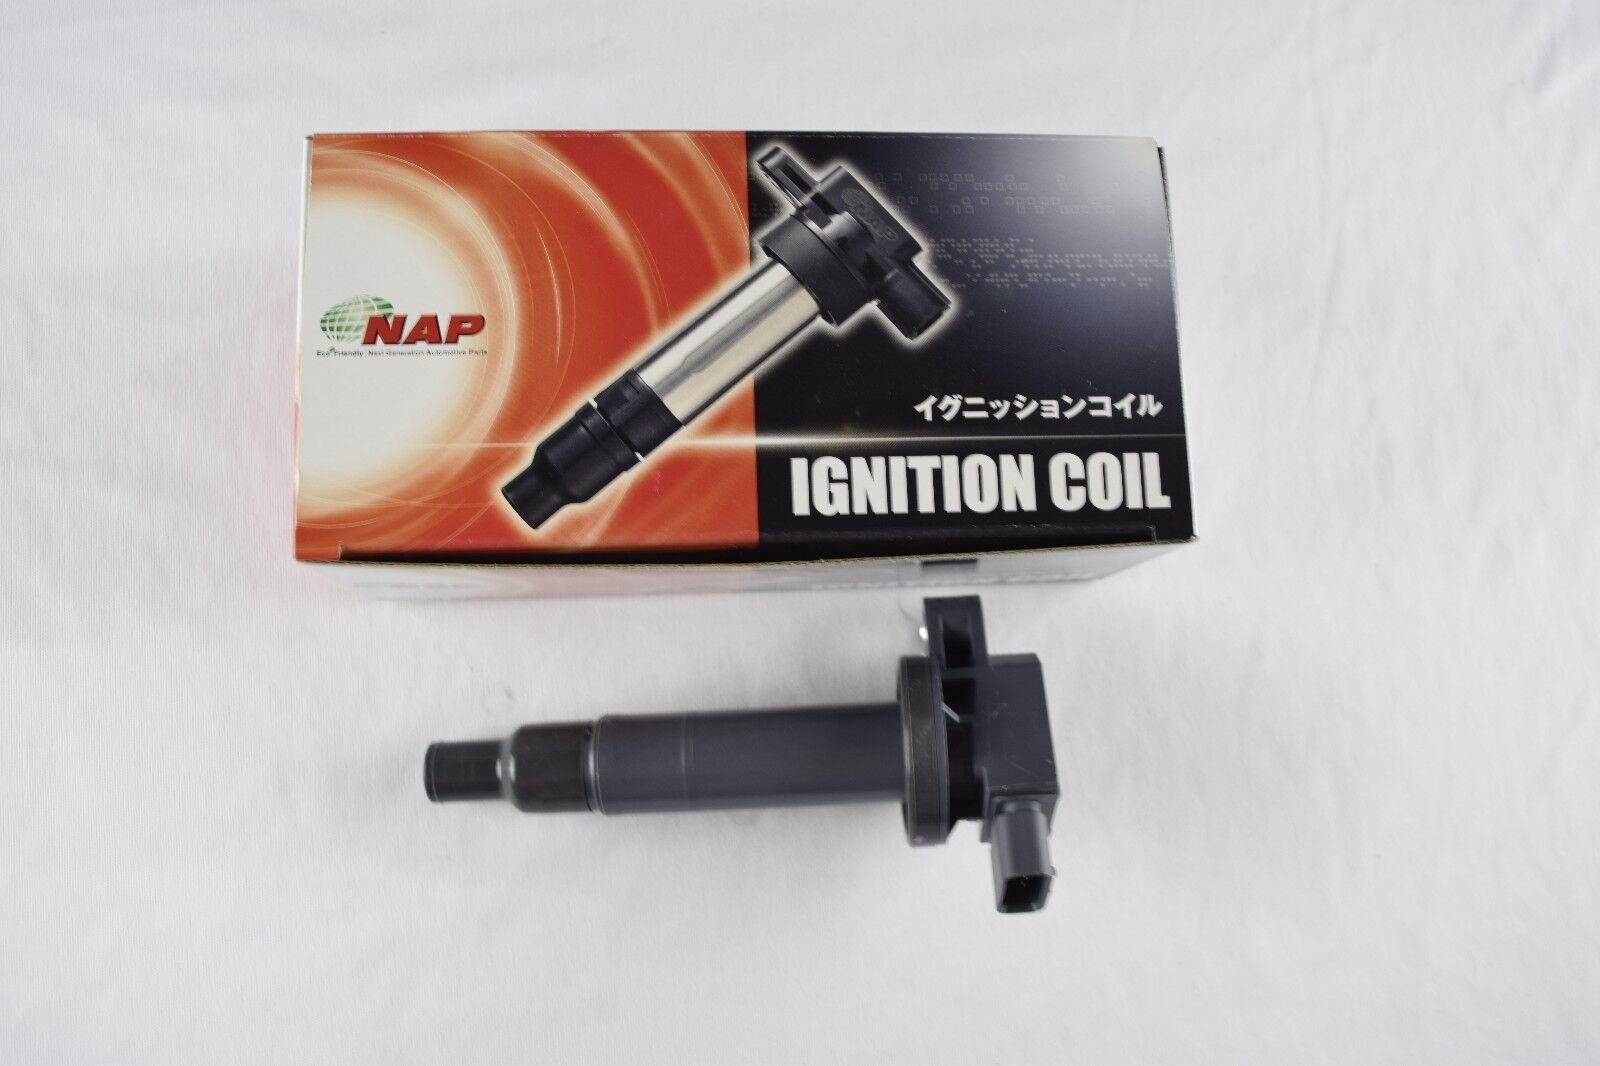 Ignition Coil: Fits Infiniti G37 FX50 G37 M37 M56 Q40/50 /60/70 (Made in Japan)